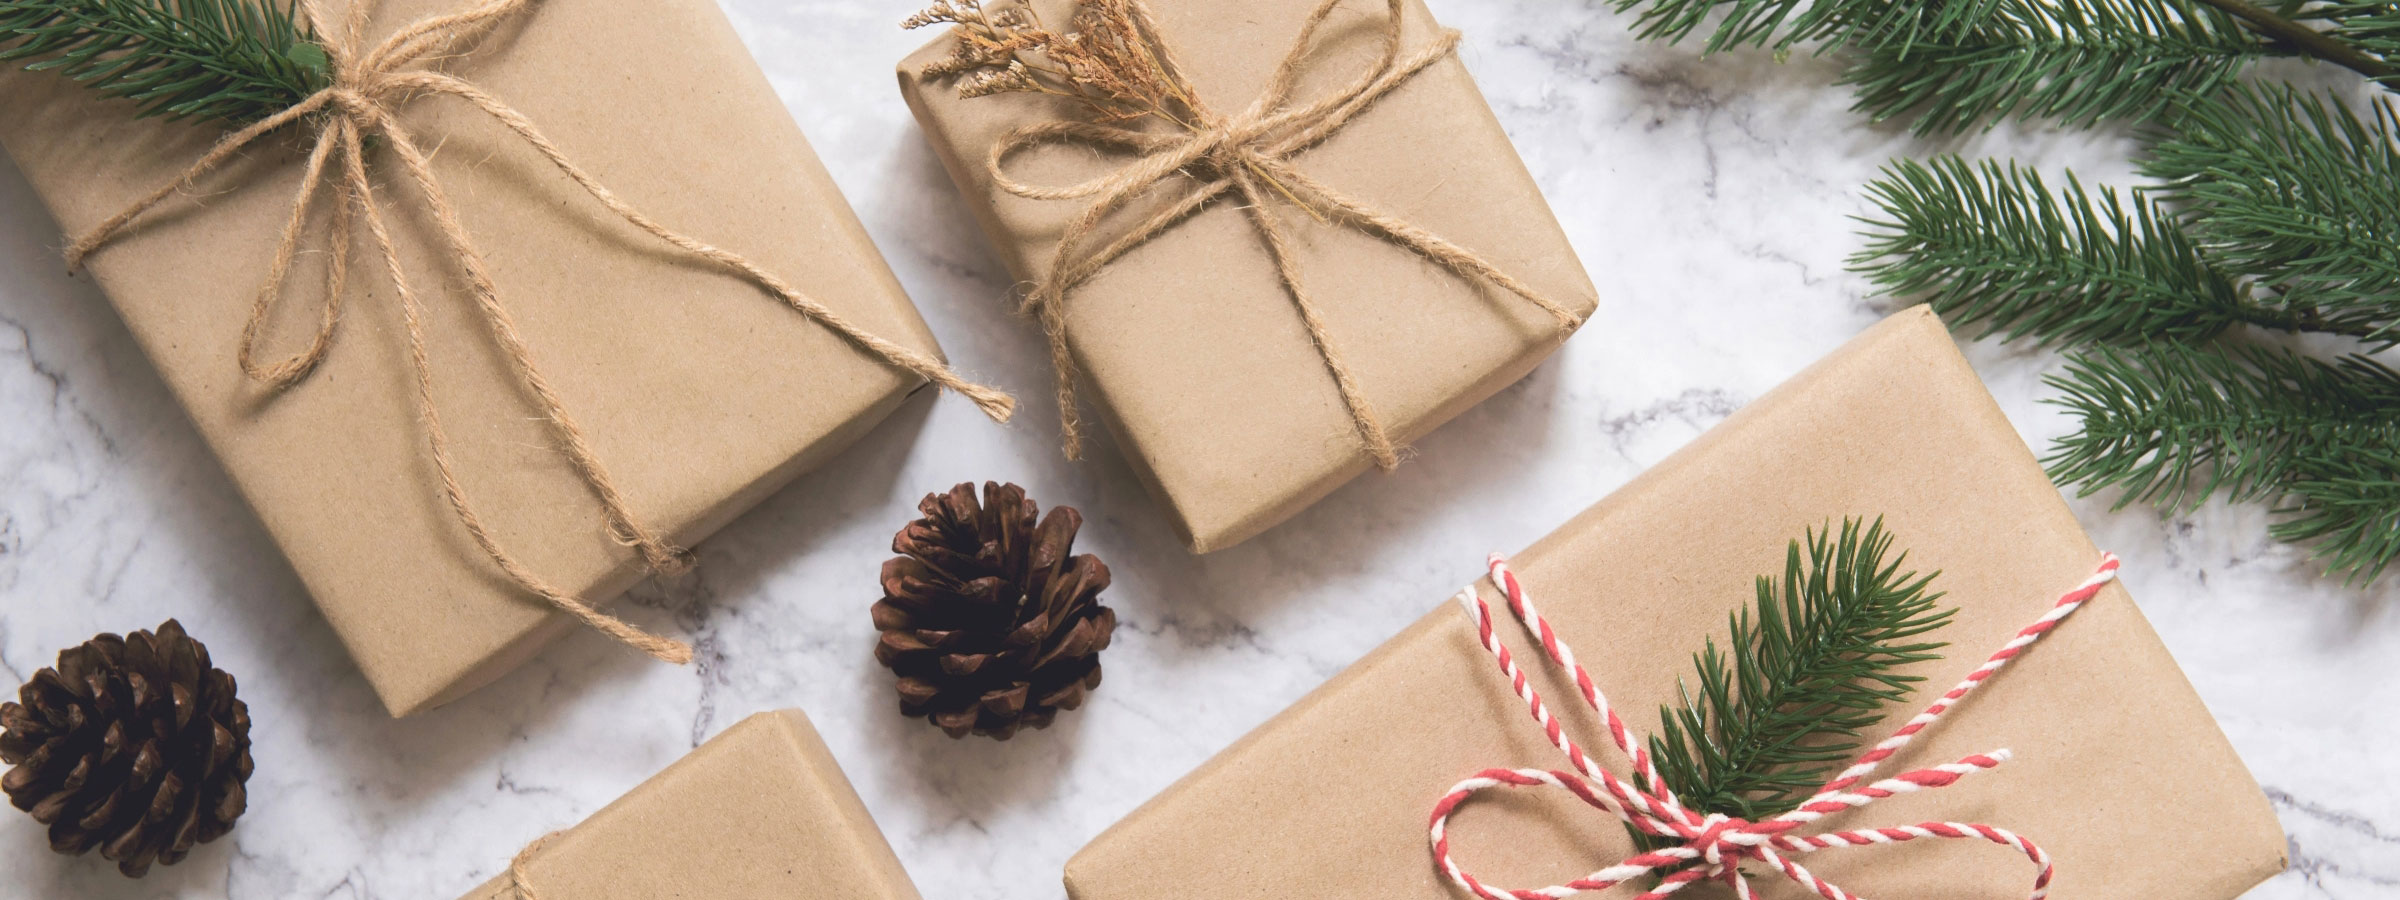 Three packages wrapped in brown paper with twine bows, with two pinecones and evergreen leaves.